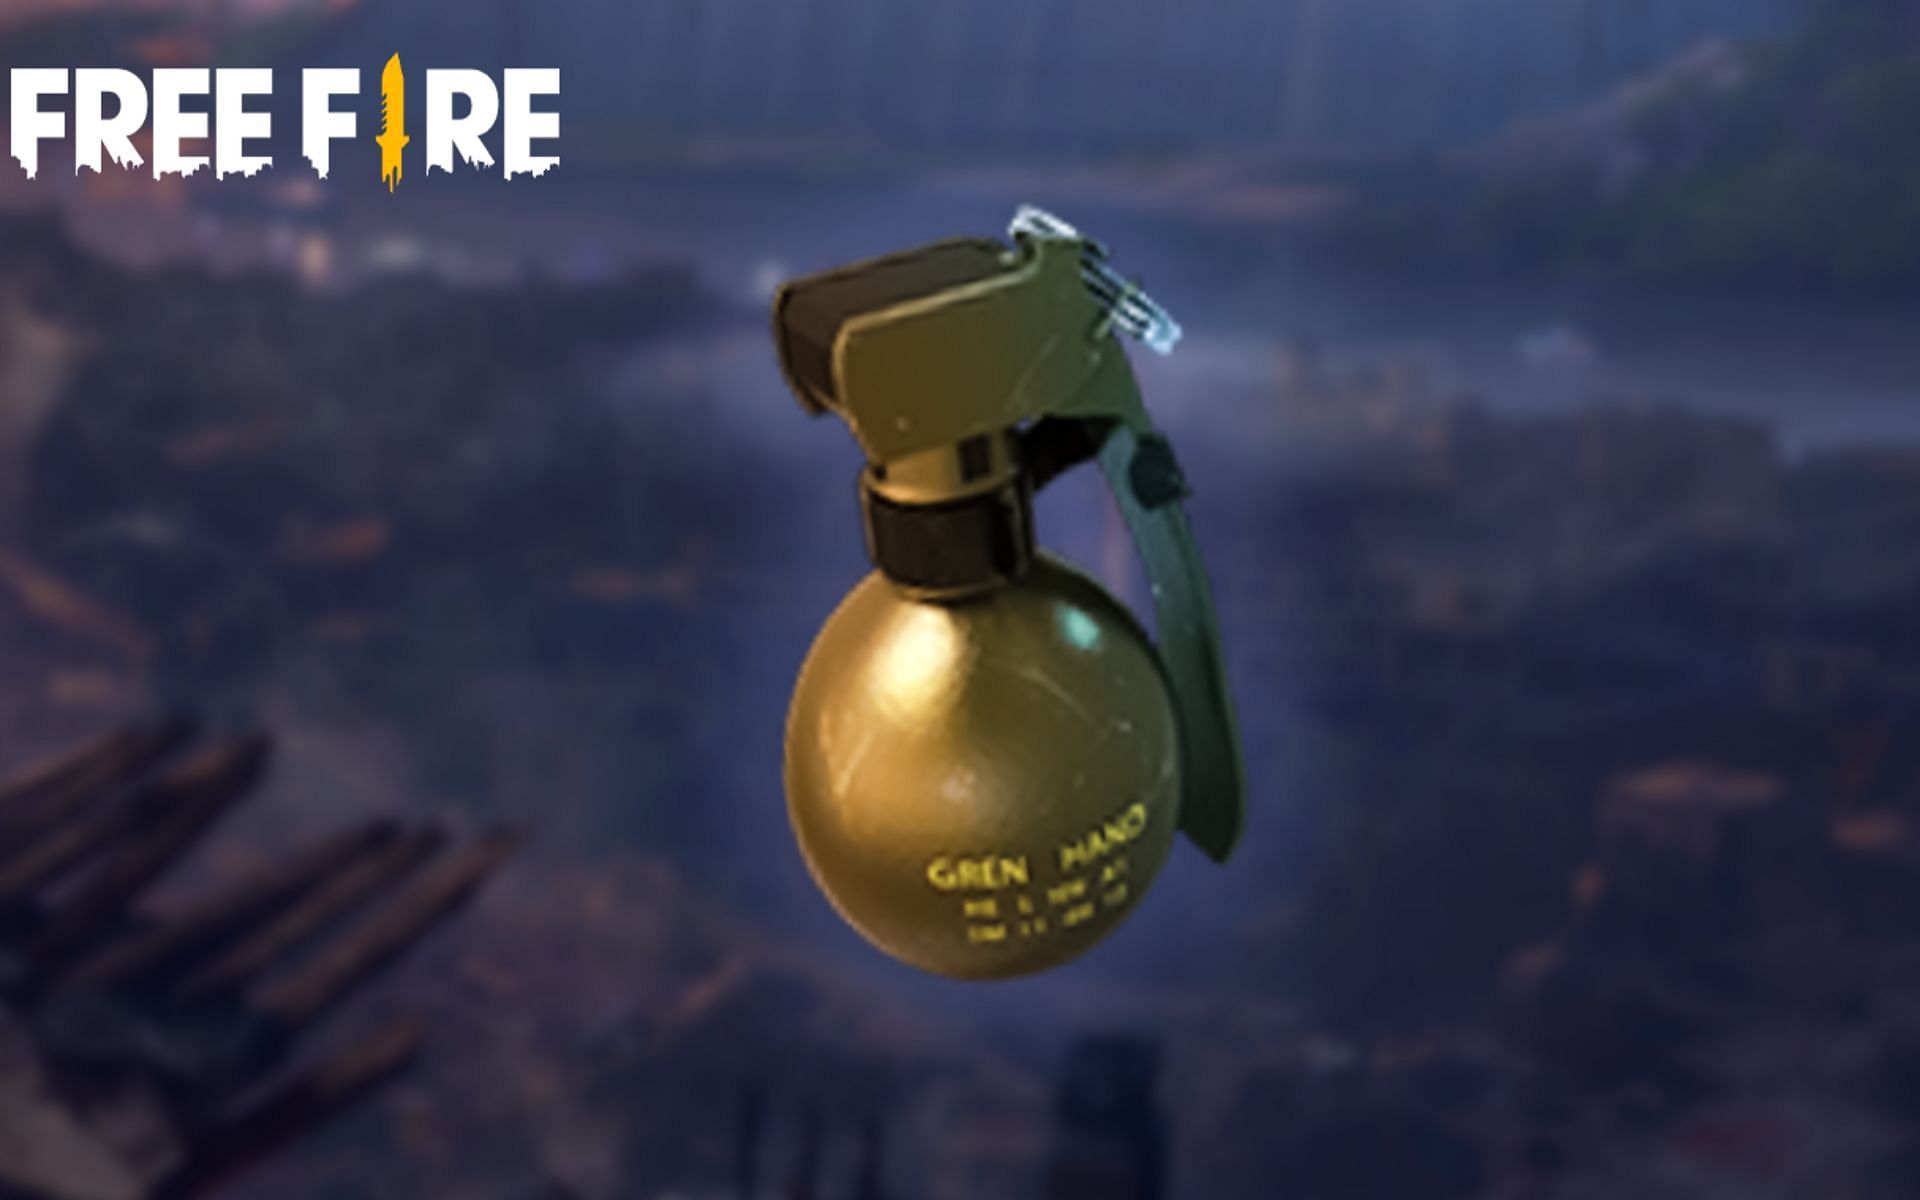 How to improve the efficiency while using grenades in Free Fire (Image via Sportskeeda)